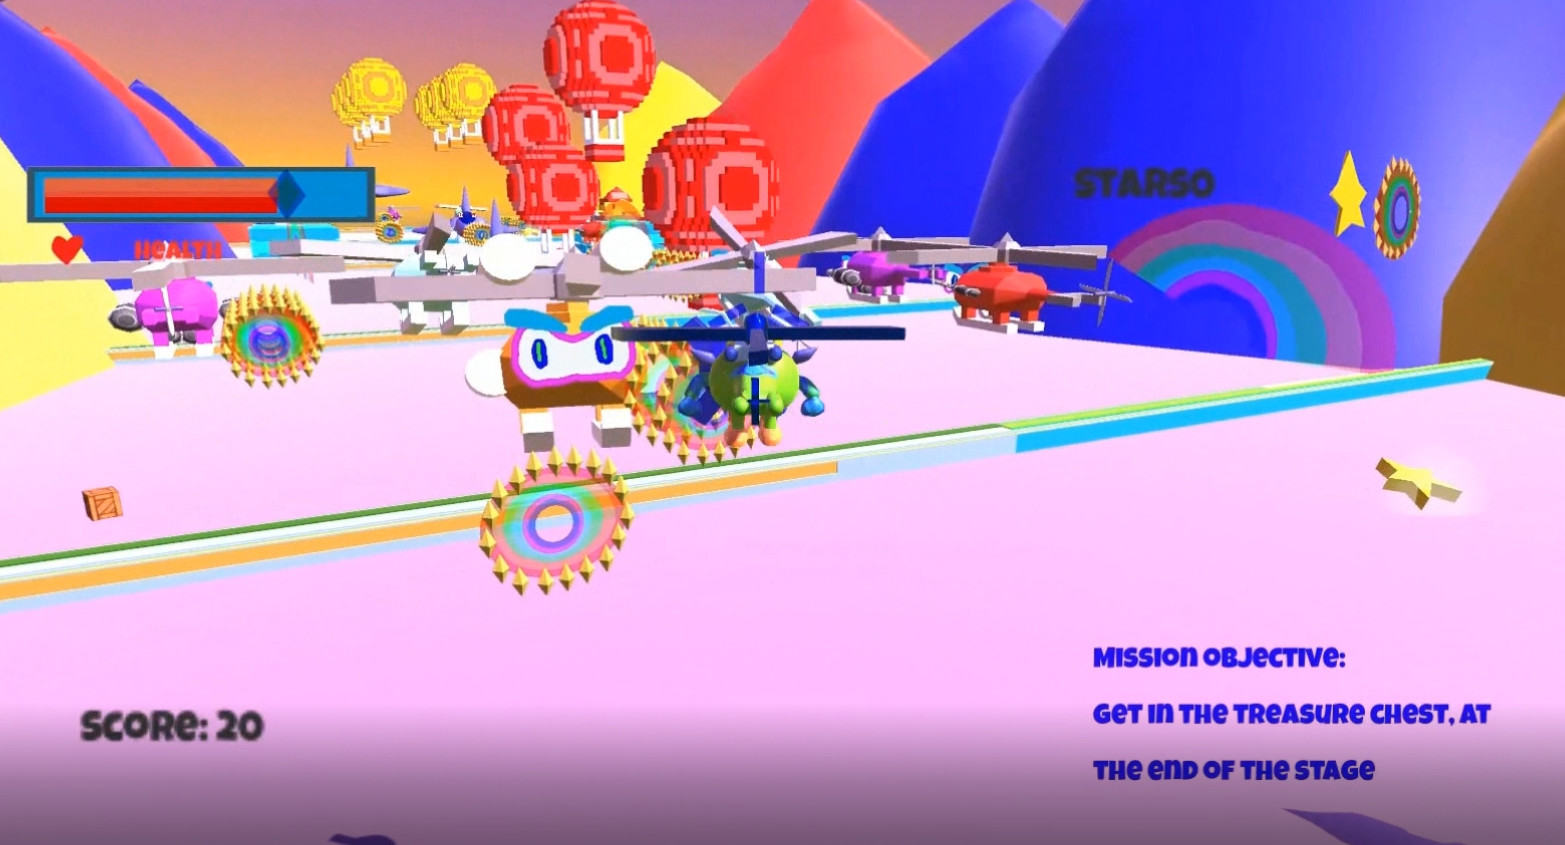 Wampee Helicopters Free Download